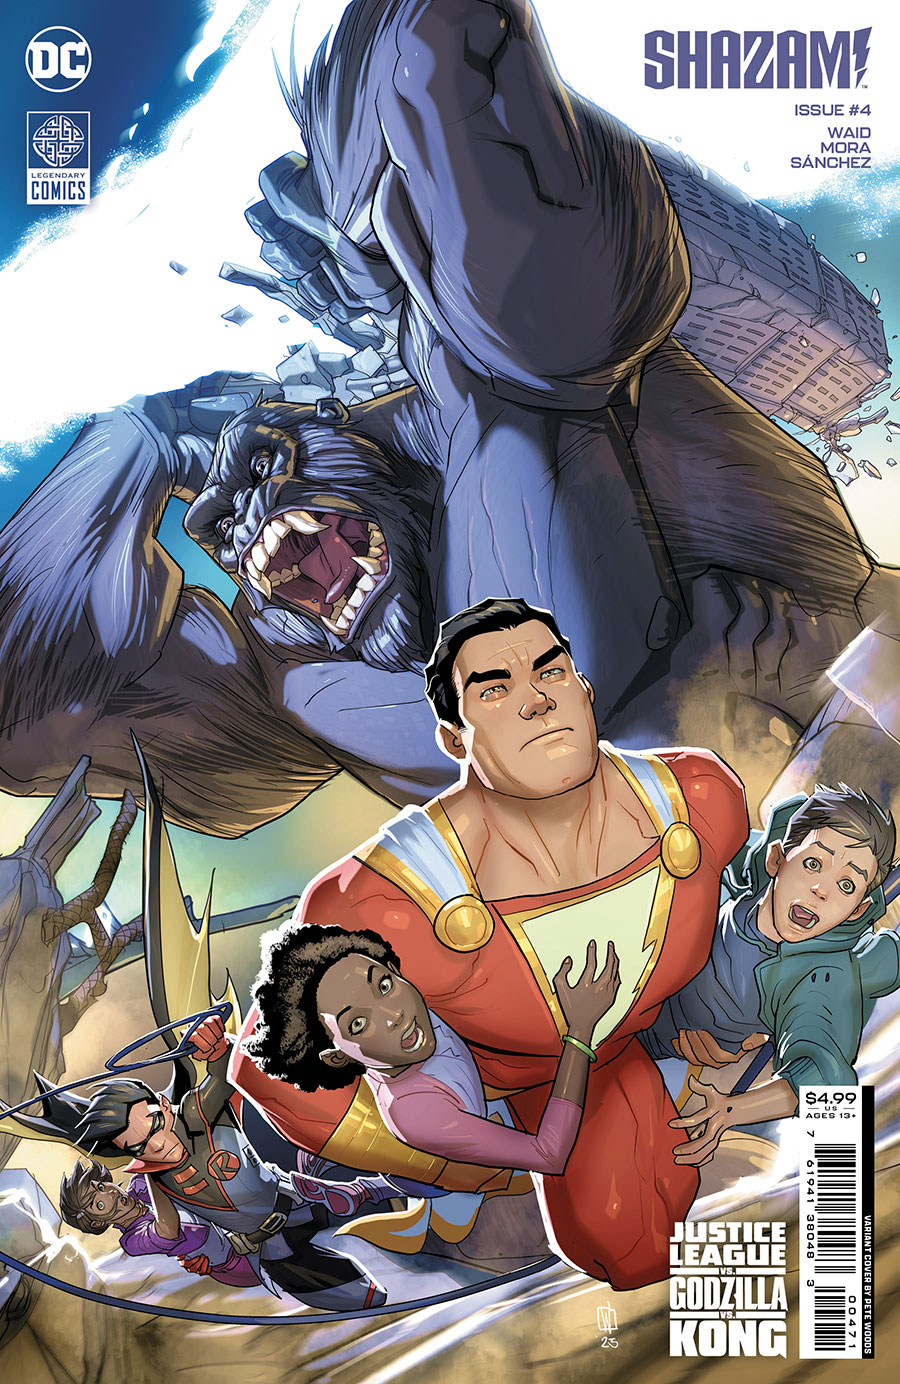 SHAZAM Vol 4 #4 Cover E Variant Pete Woods Justice League vs Godzilla vs Kong Connecting Card Stock Cover